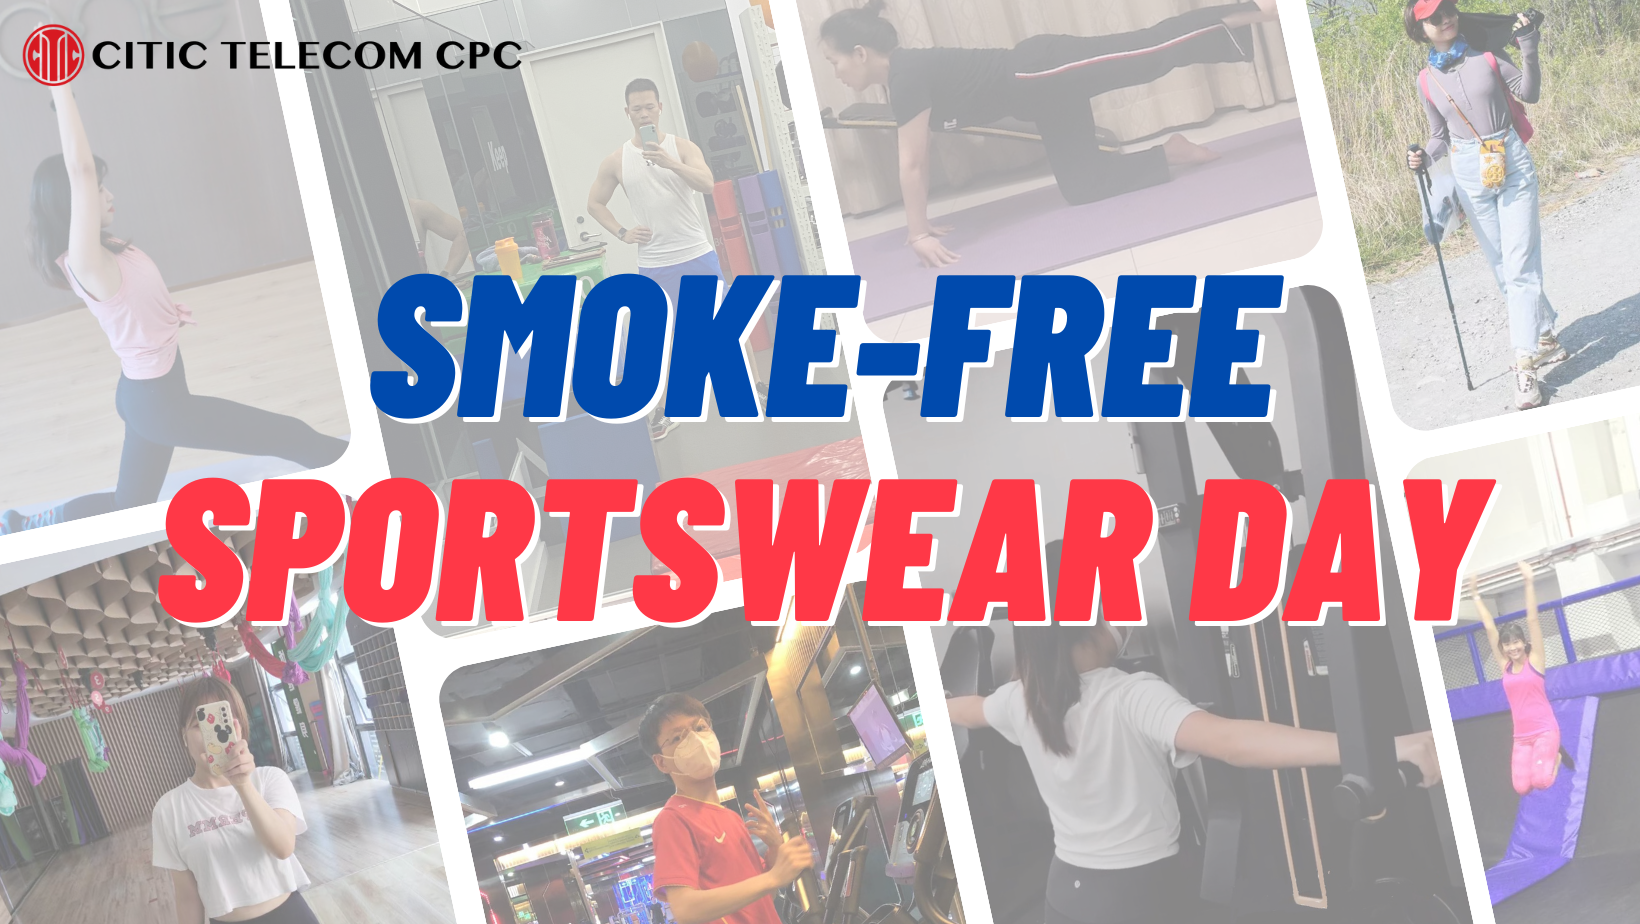 The Most Active Participation Award - Organization of Smoke-free Sportswear Day